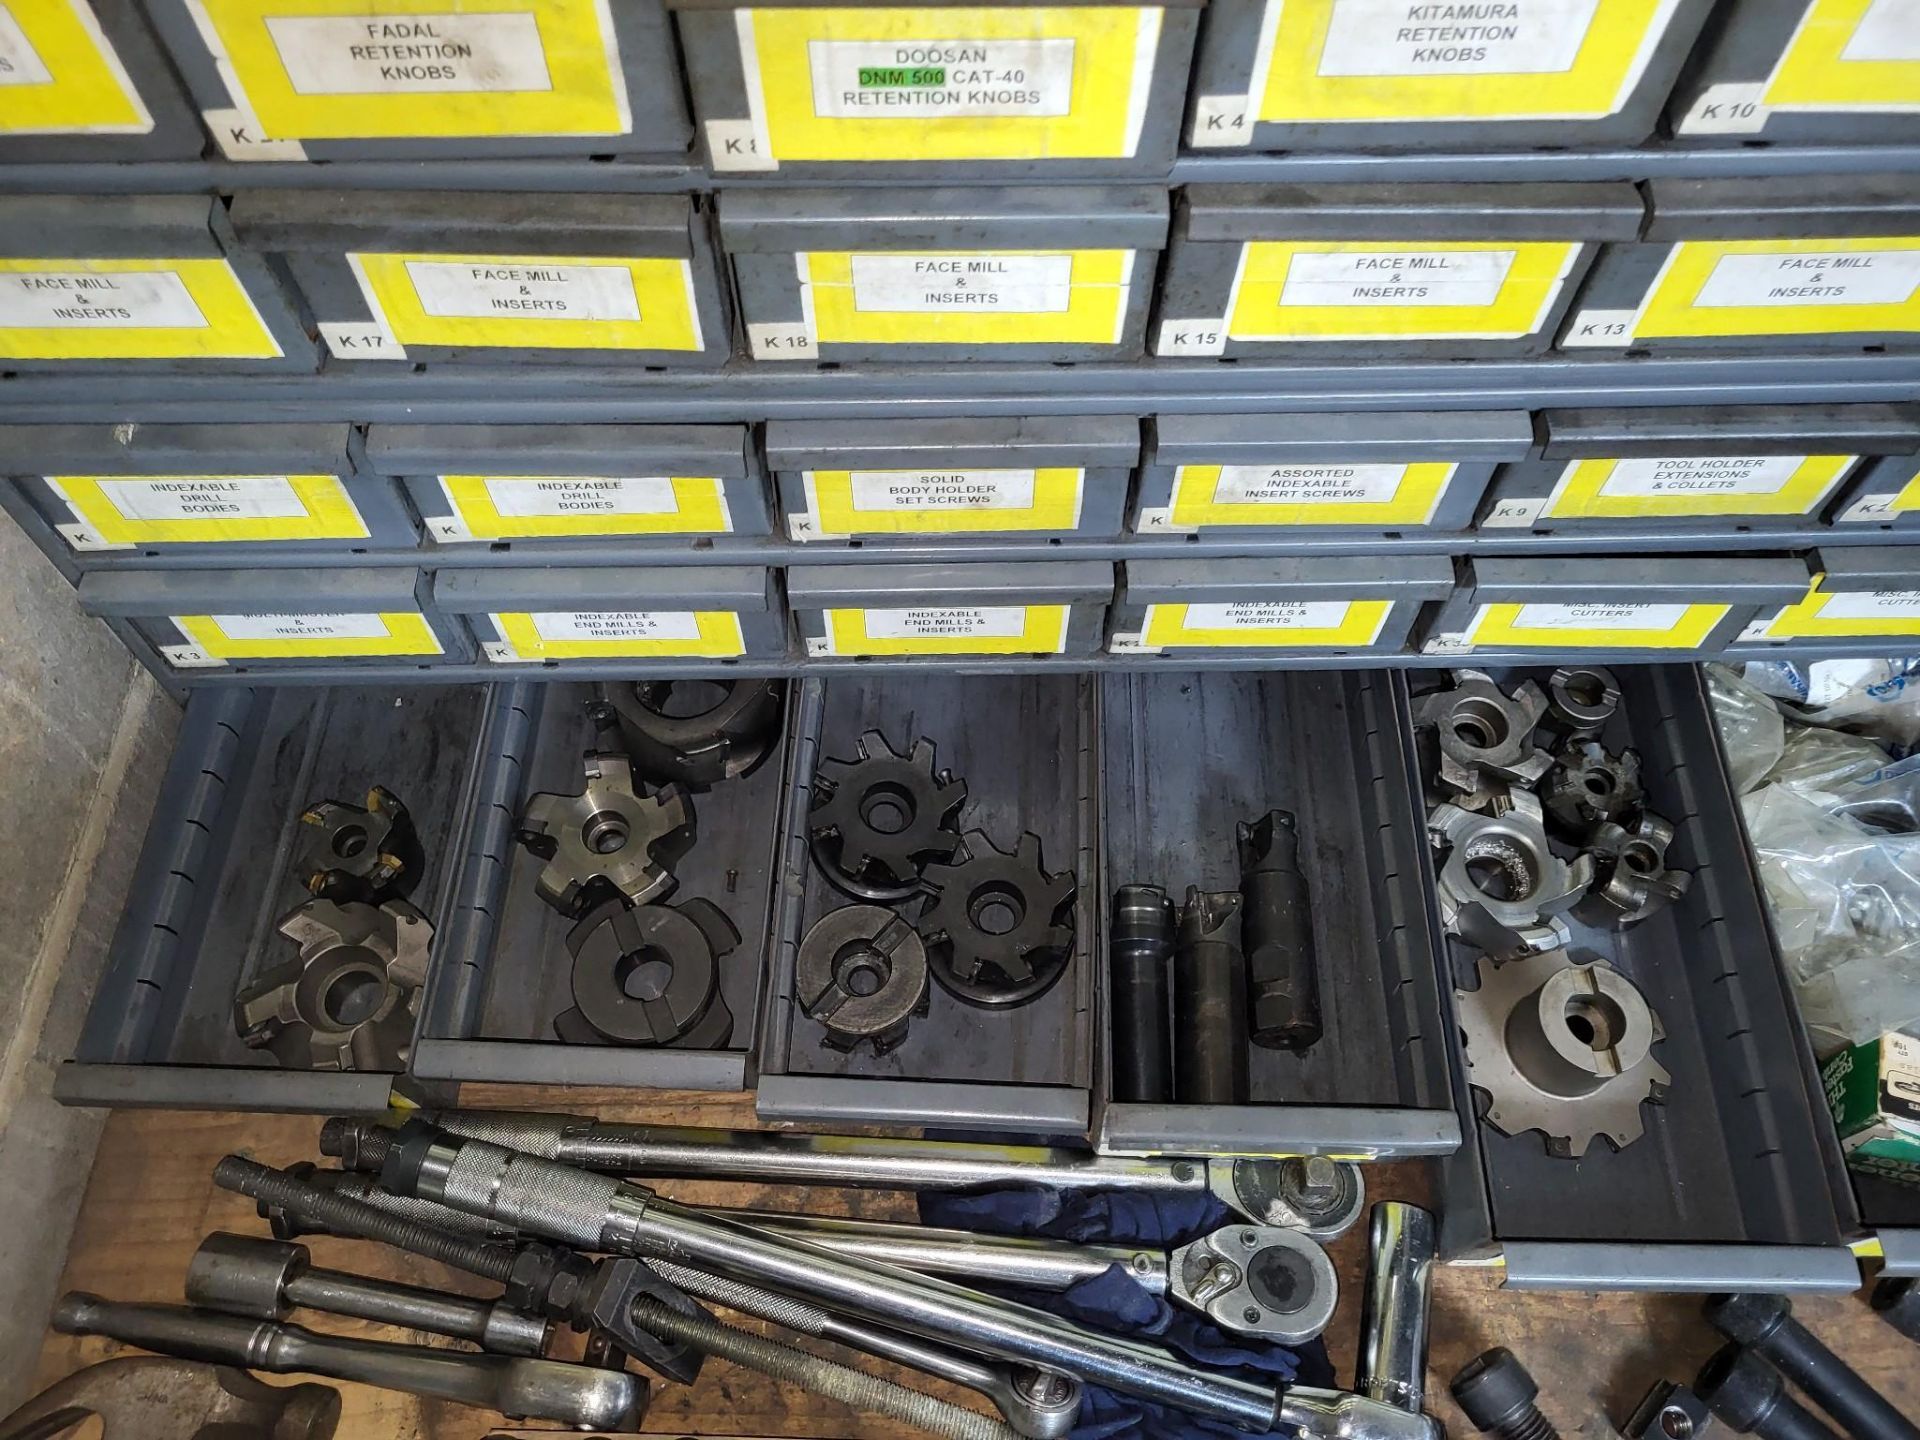 LARGE LOT OF MILLING TOOLS, TAPS, CARBIDE INSERTS, SETUP HARDWARE AND HAND TOOLS - Image 15 of 24